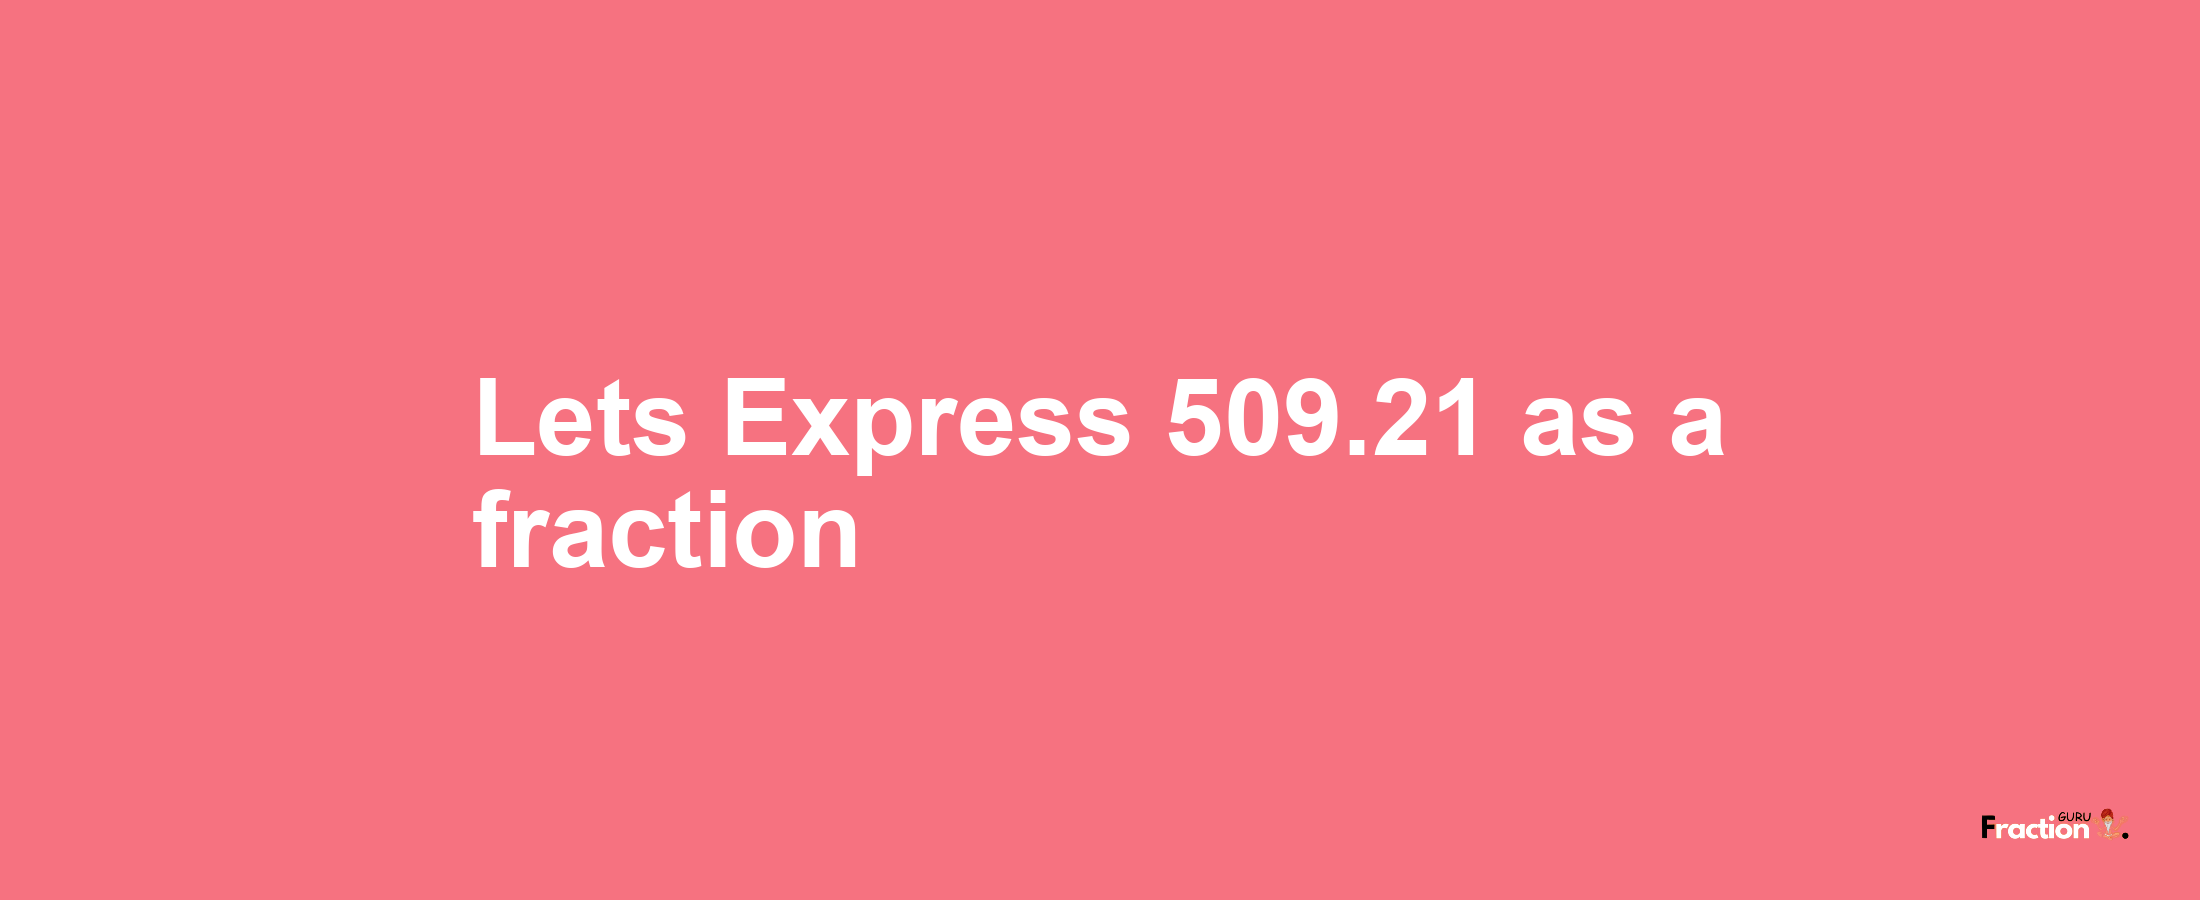 Lets Express 509.21 as afraction